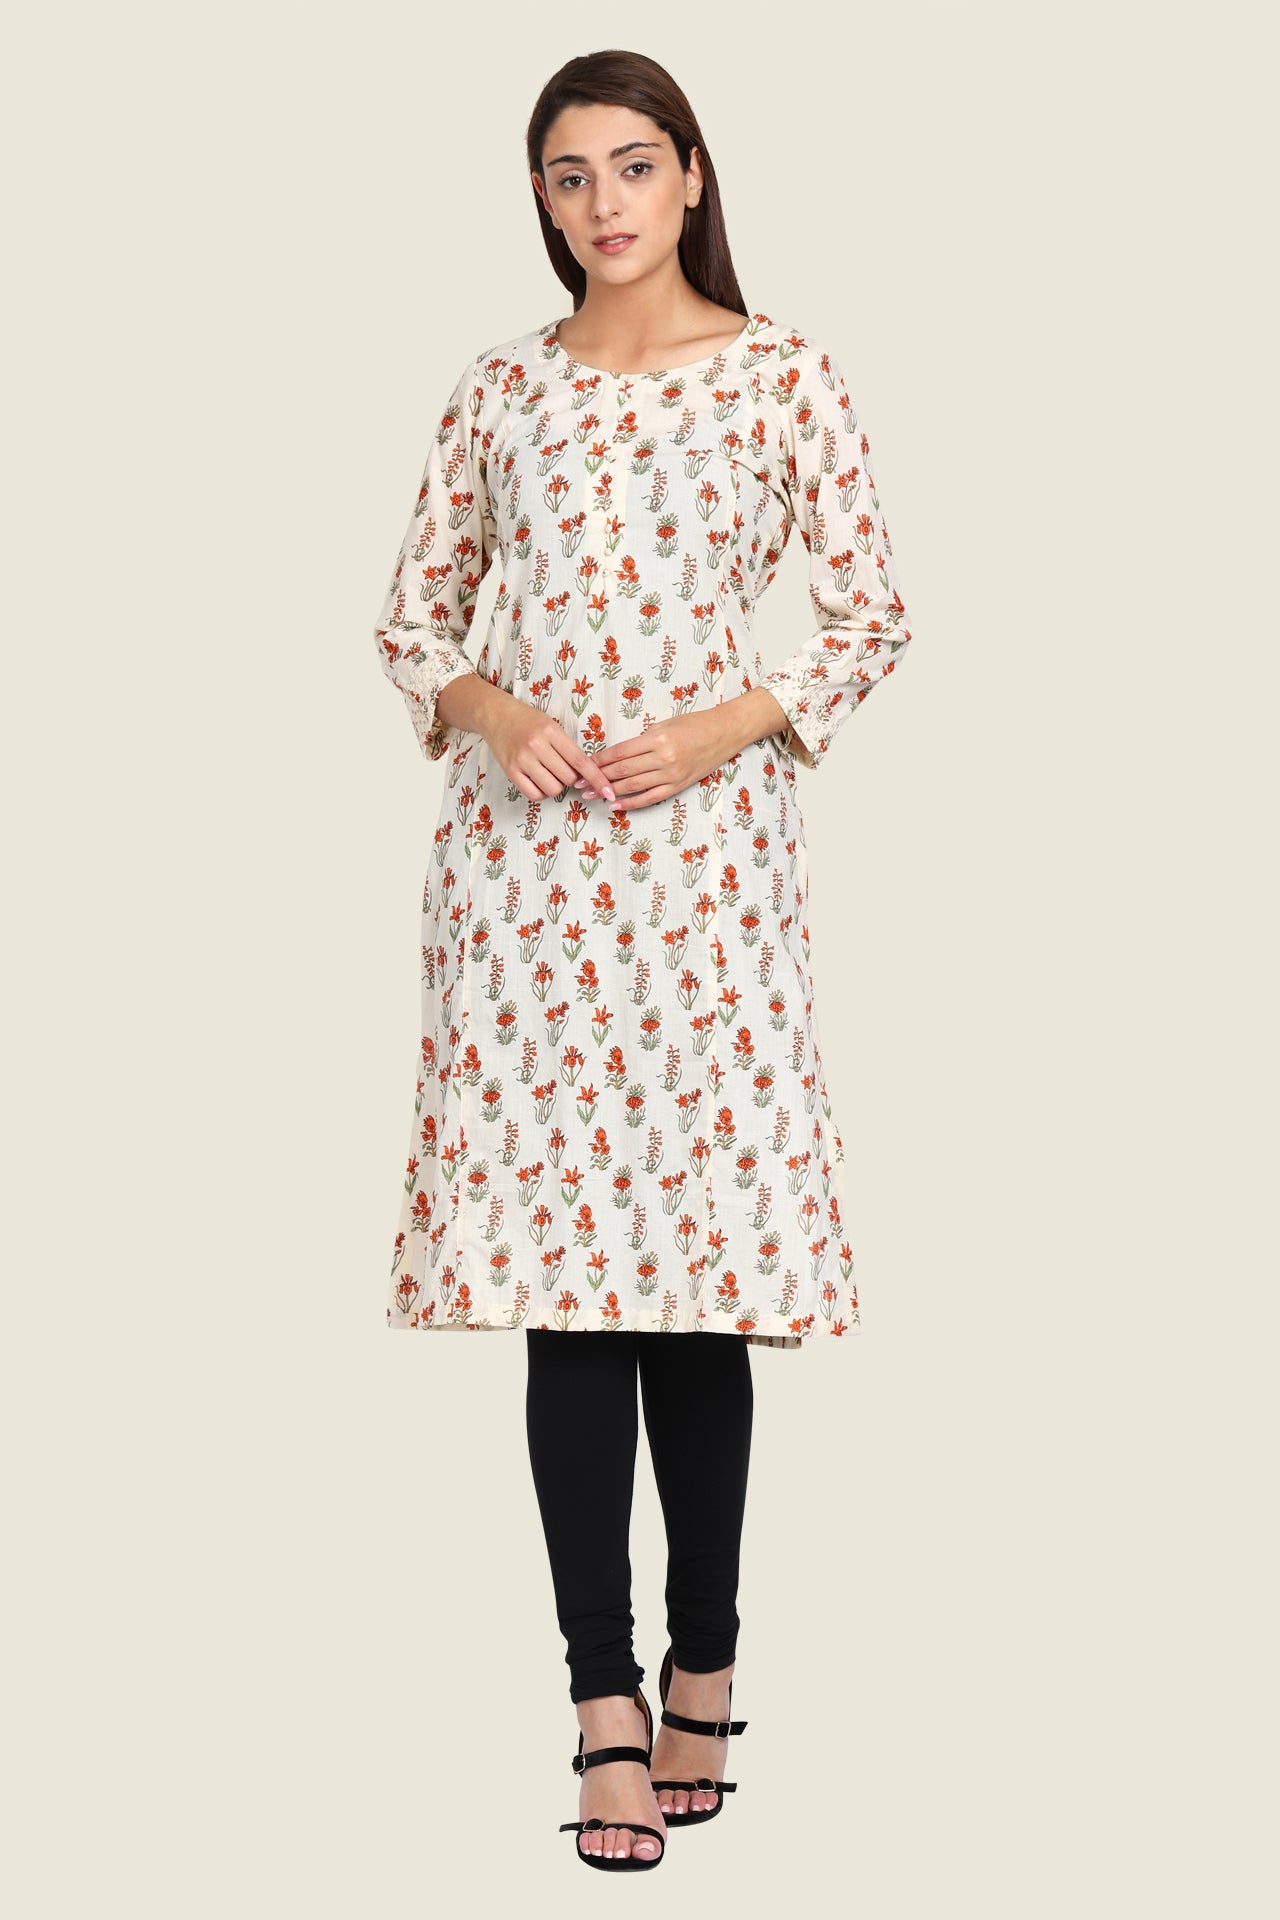 AMODINI CREAM PRINTED WITH EMBROIDERY ON SLEEVES